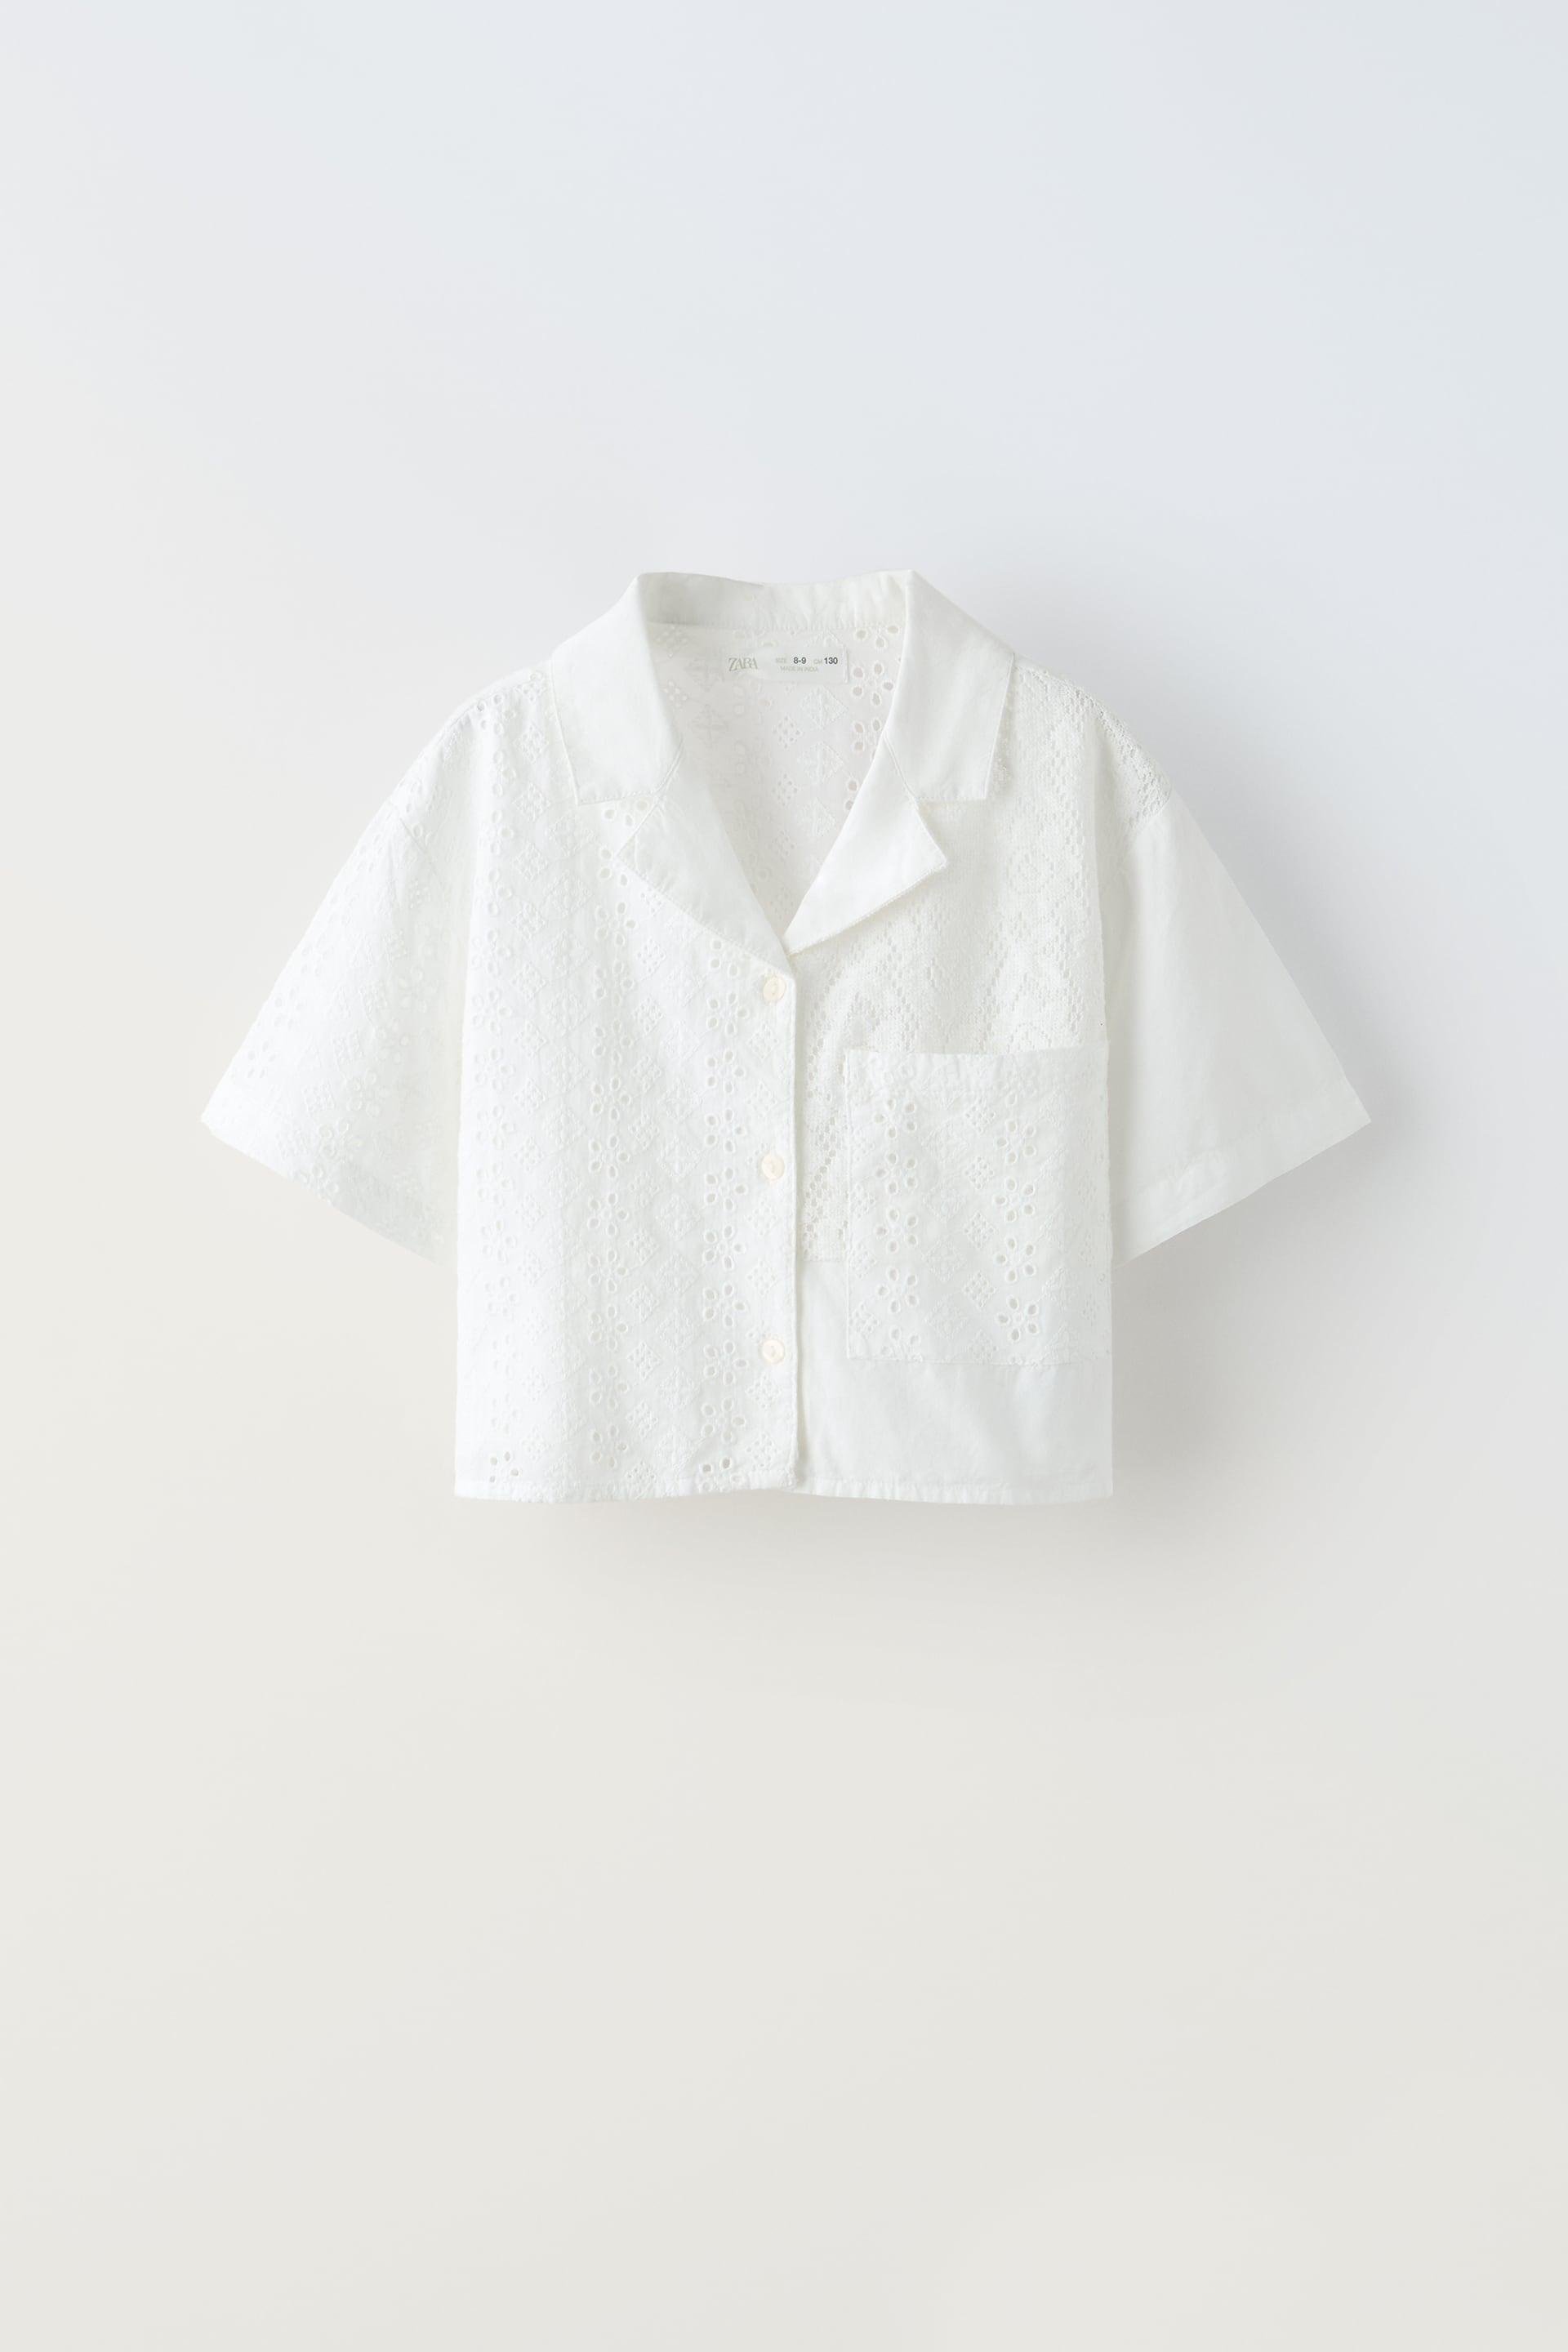 PATCHWORK EMBROIDERED SHIRT by ZARA